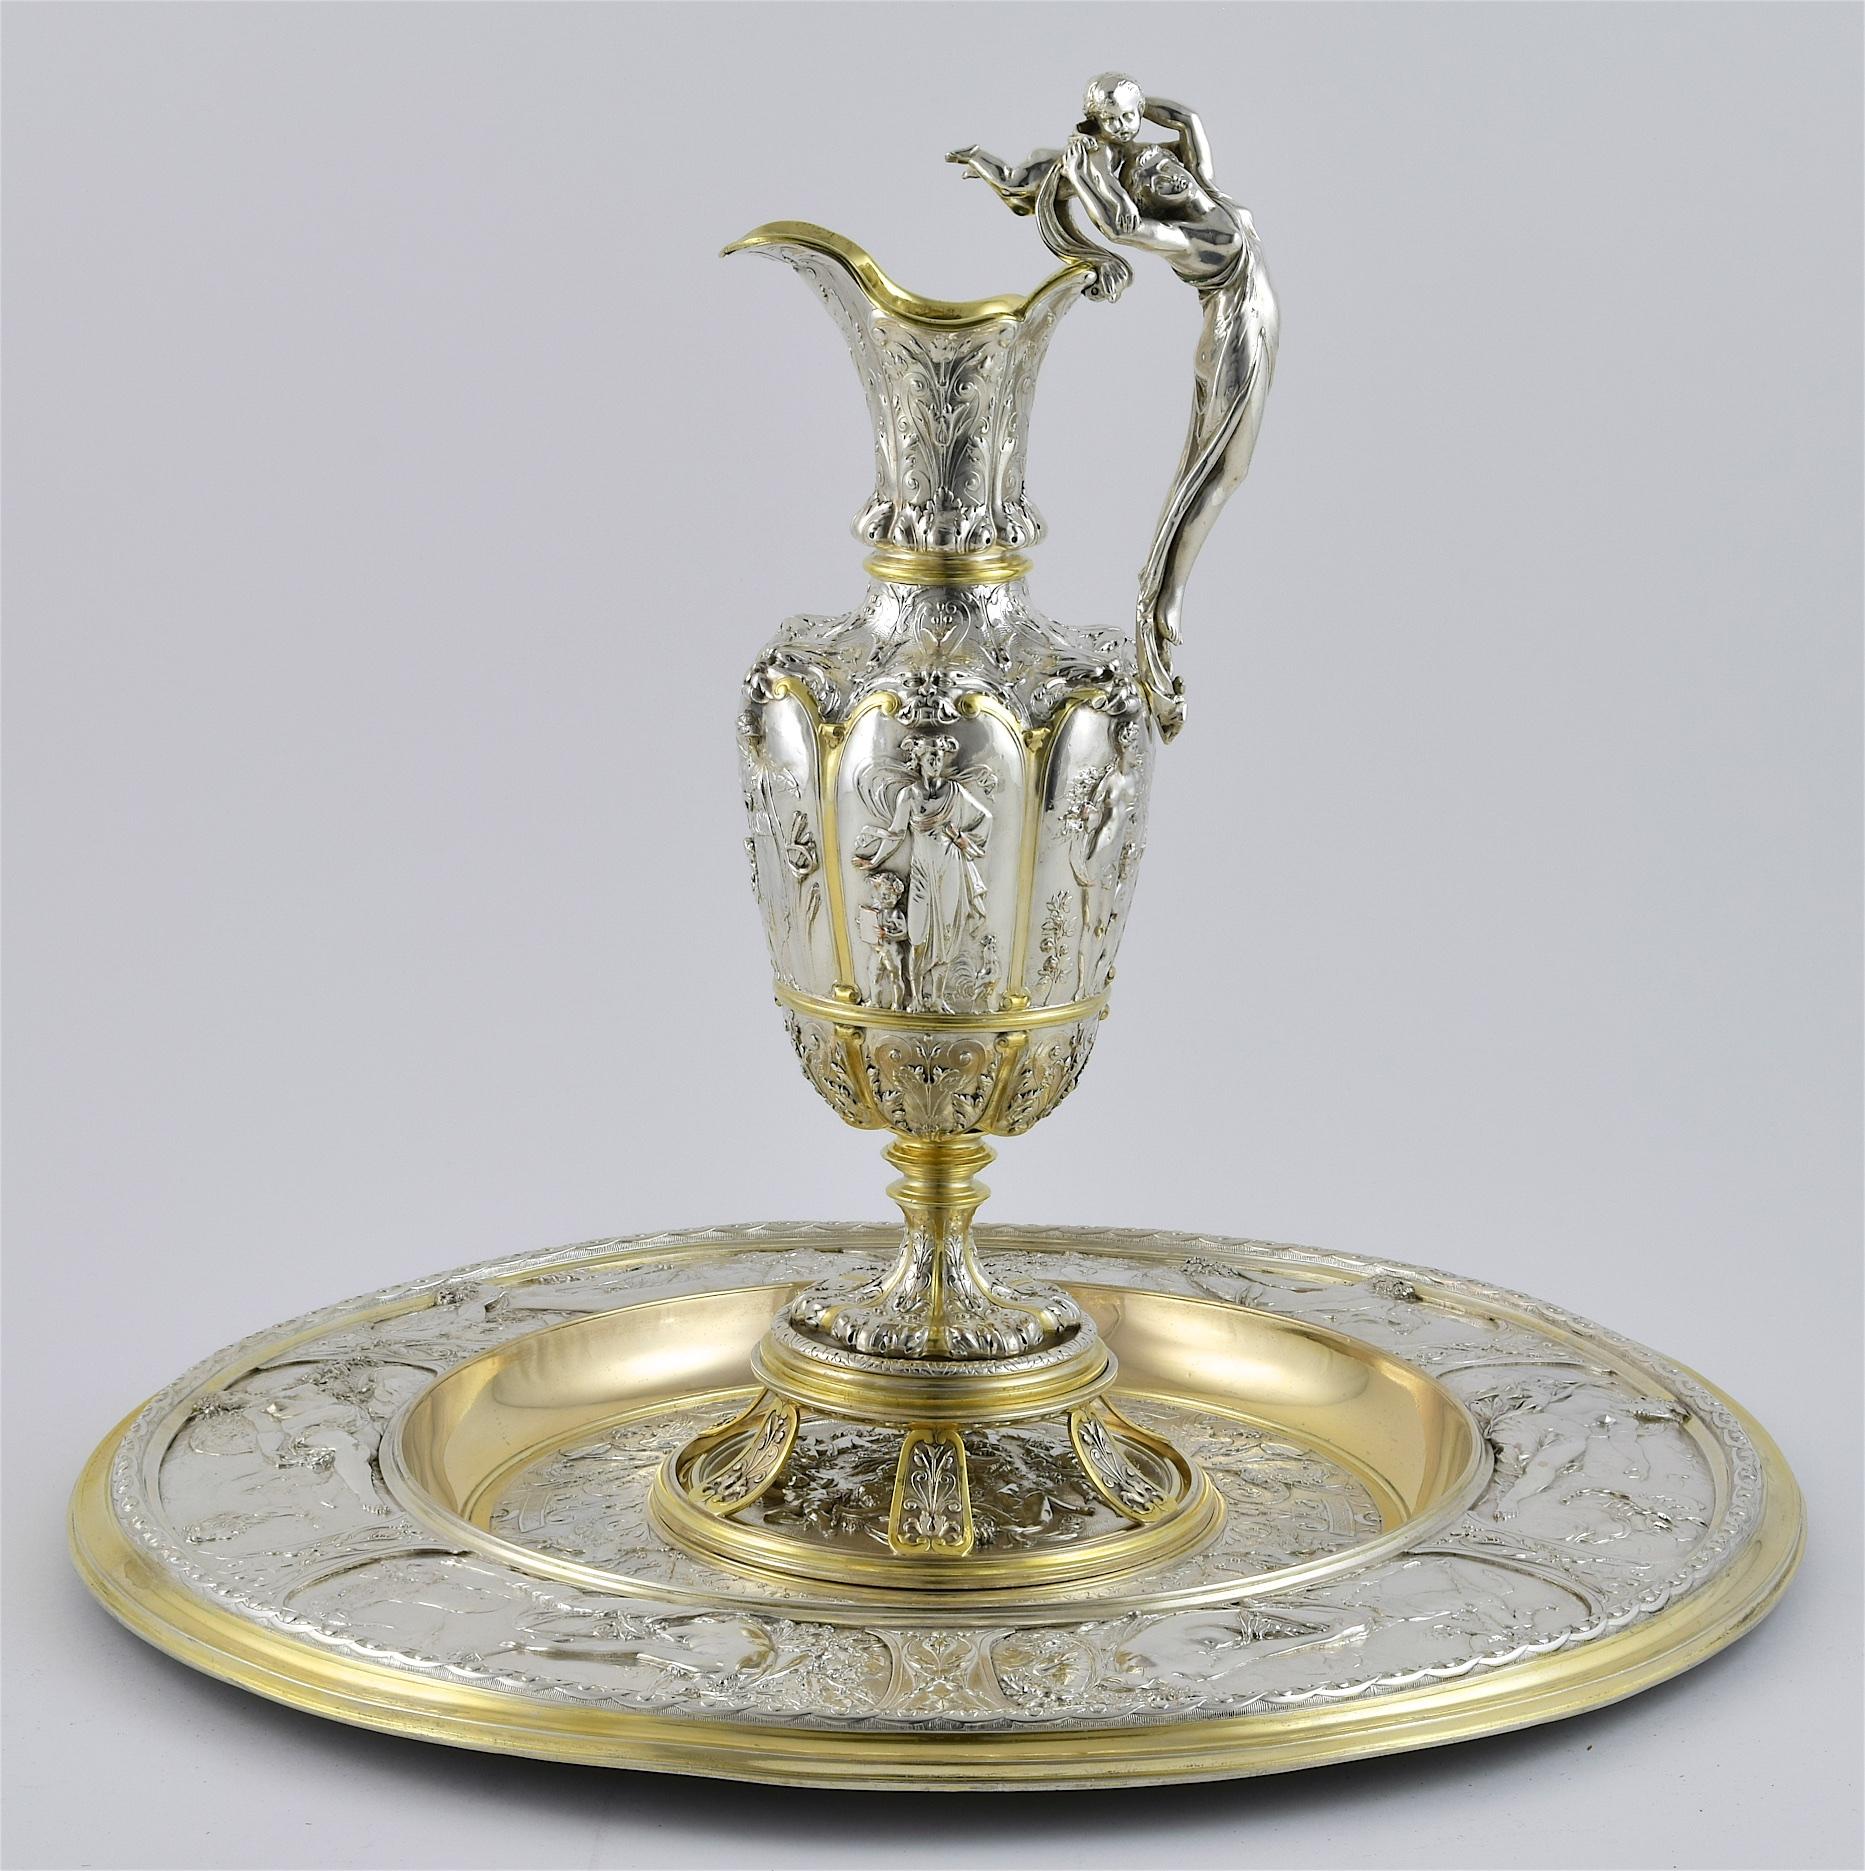 A parcel gilt silver plated electroform rosewater dish, ewer and stand, made in Birmingham. The rosewater dish is formed as 'the seasons dish', the matching jug and stand are also similarly styled with classical themes and decorations. 



Elkington